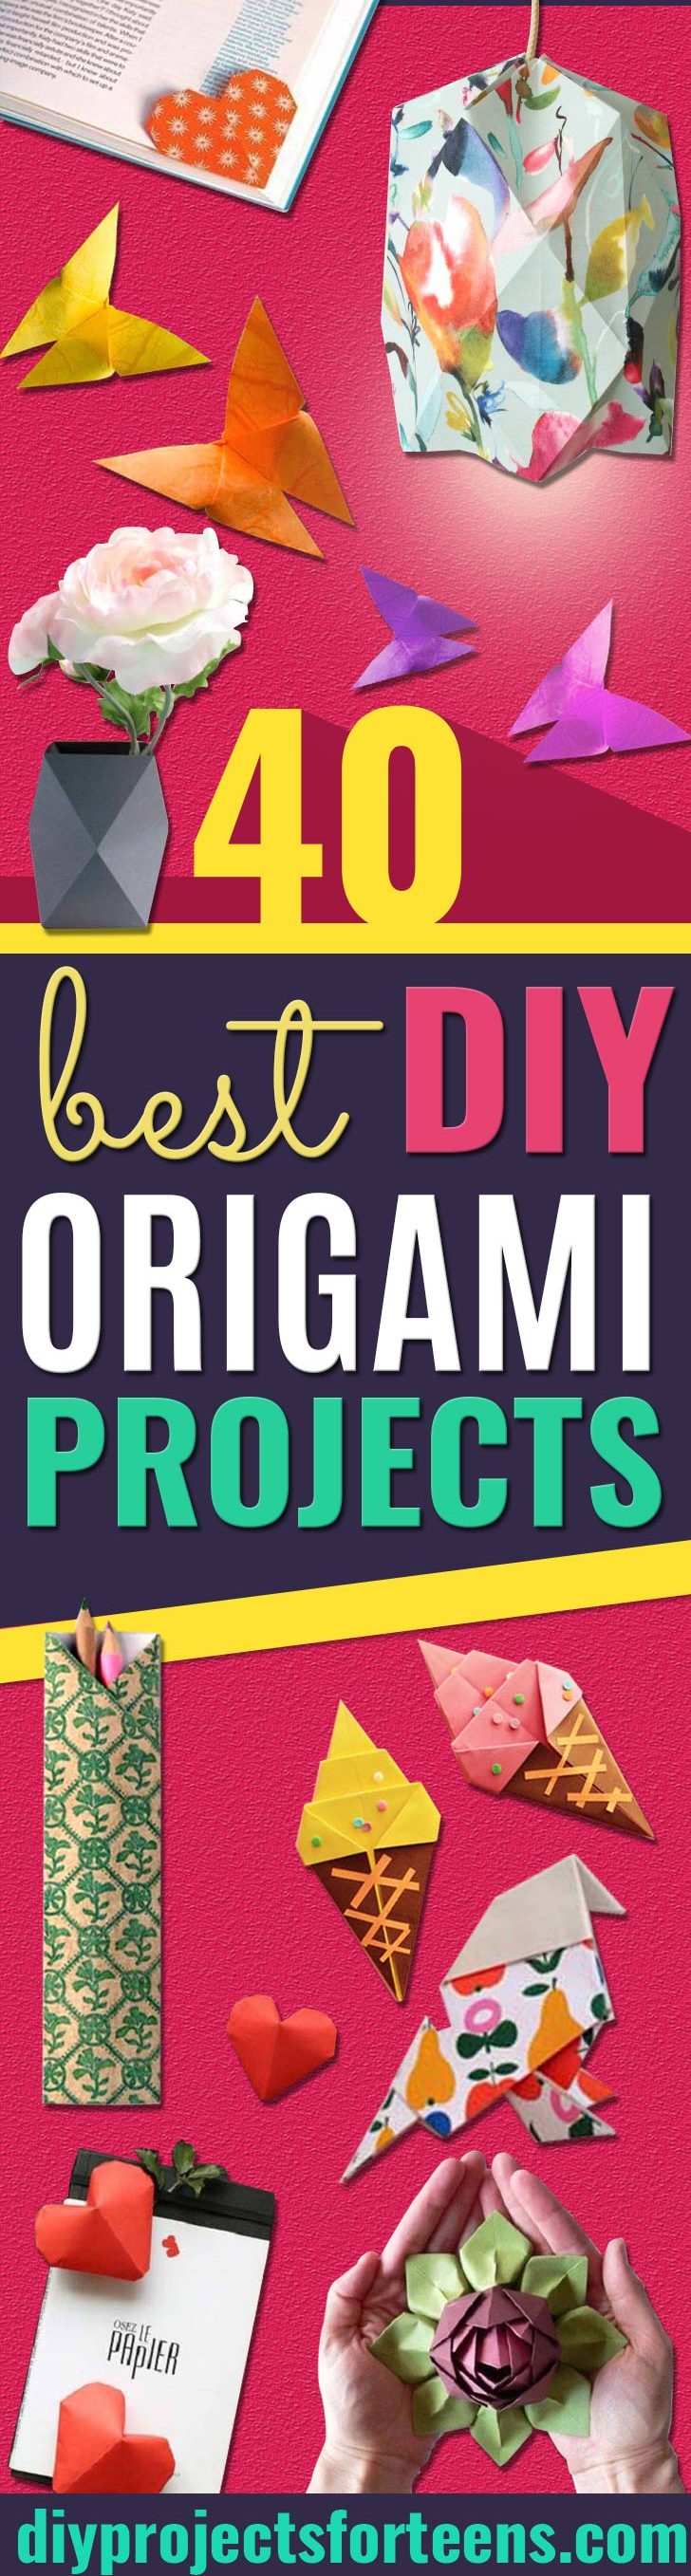 Origami Tutorials Step by Step - Easy DIY Origami Tutorial Projects for With Instructions for Flowers, Dog, Gift Box, Star, Owl, Buttlerfly, Heart and Bookmark, Animals - Fun Paper Crafts for Teens, Kids and Adults - Cool Teen Crafts That Are Cheap #teencrafts #origami #papercrafts